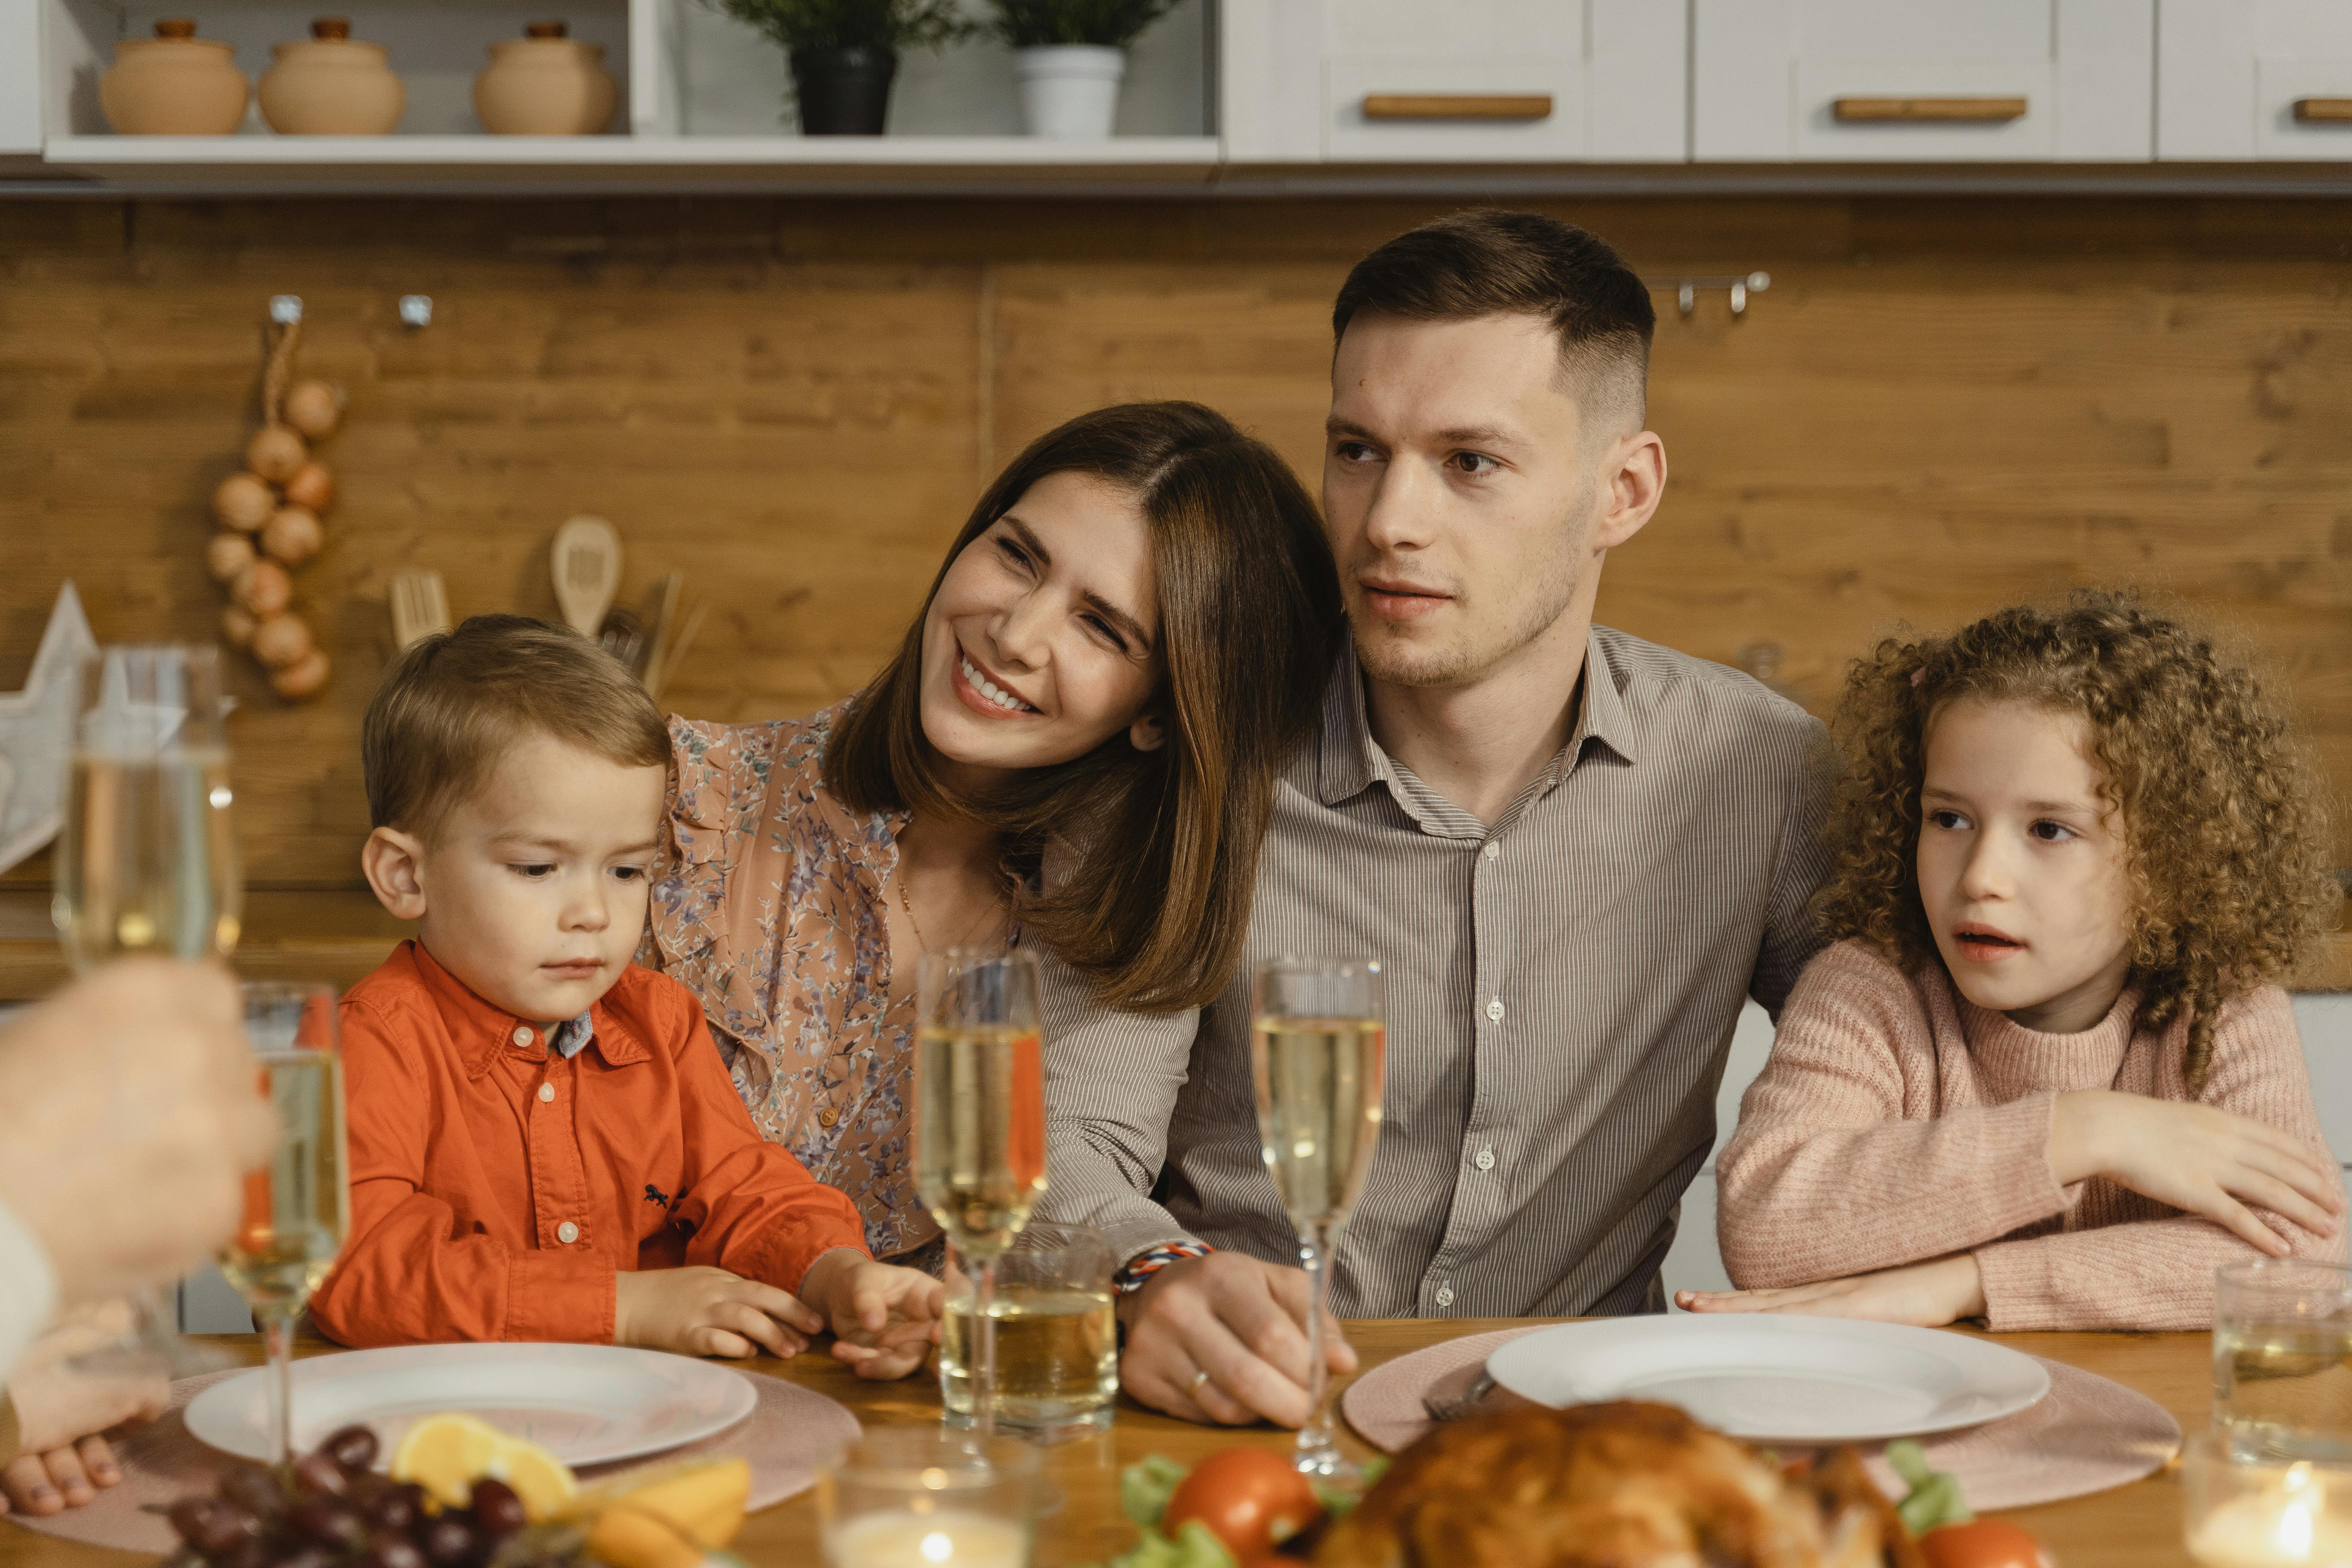 A family of four sitting together for a meal | Source: Pexels